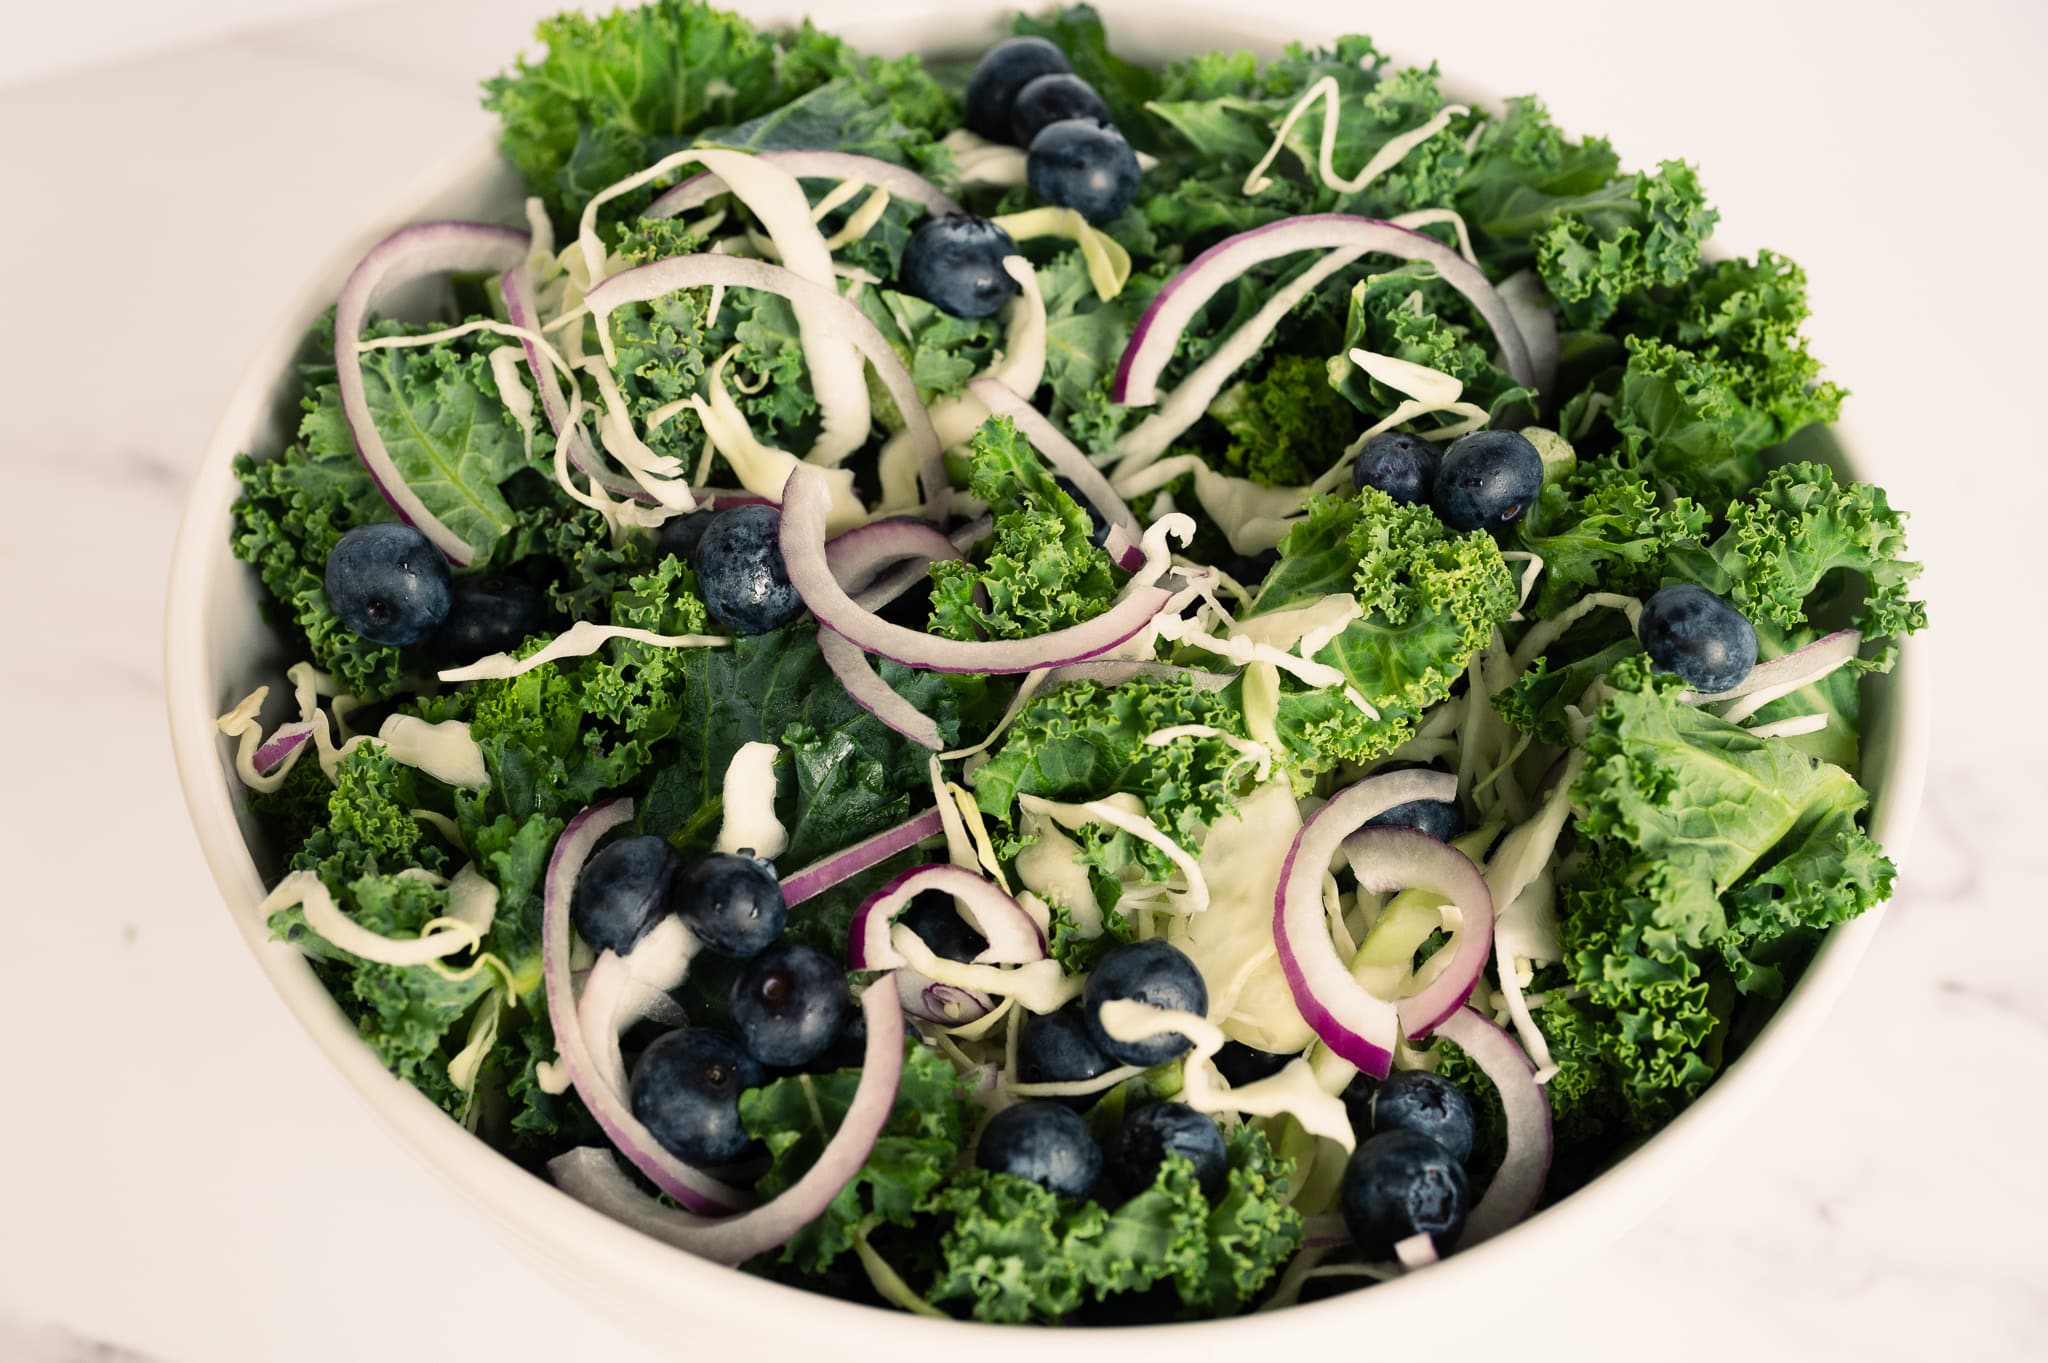  A process image depicting the Kale Crunch Salad mixture of chopped kale, shredded cabbage, fresh blueberries, and sliced red onions in a white bowl, with a wooden spoon nearby, set against a white background, showcasing the colorful ingredients being combined in the salad preparation.